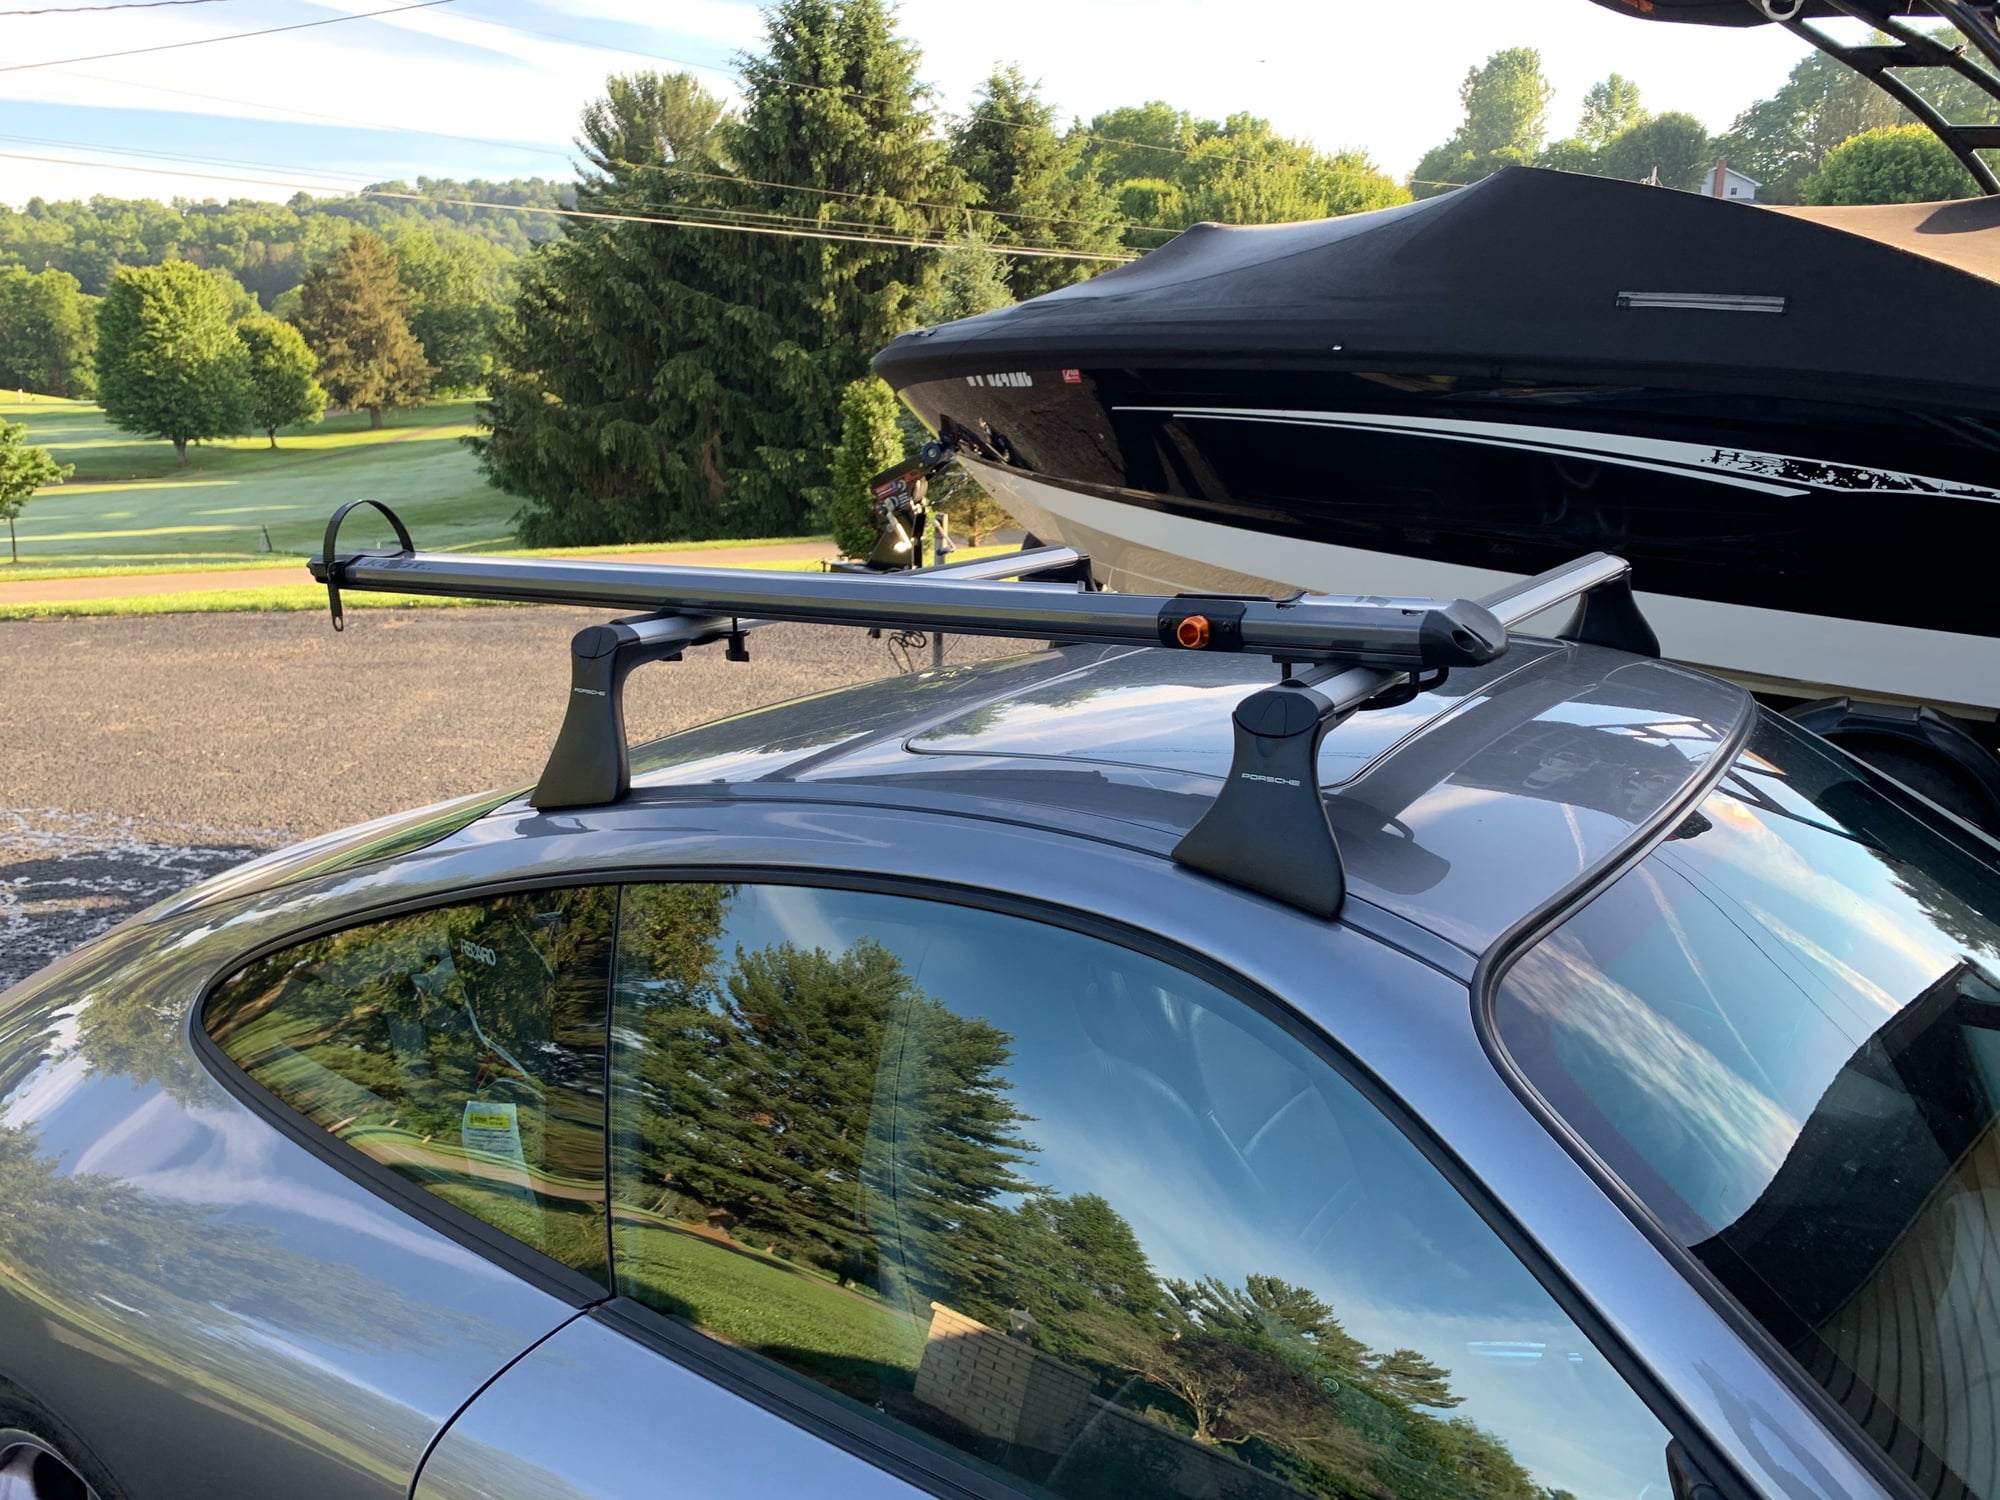 Accessories - 996 Roof Rack with Kuat Trio bike carrier - Used - 1999 to 2004 Porsche 911 - Bridgeport, WV 26330, United States